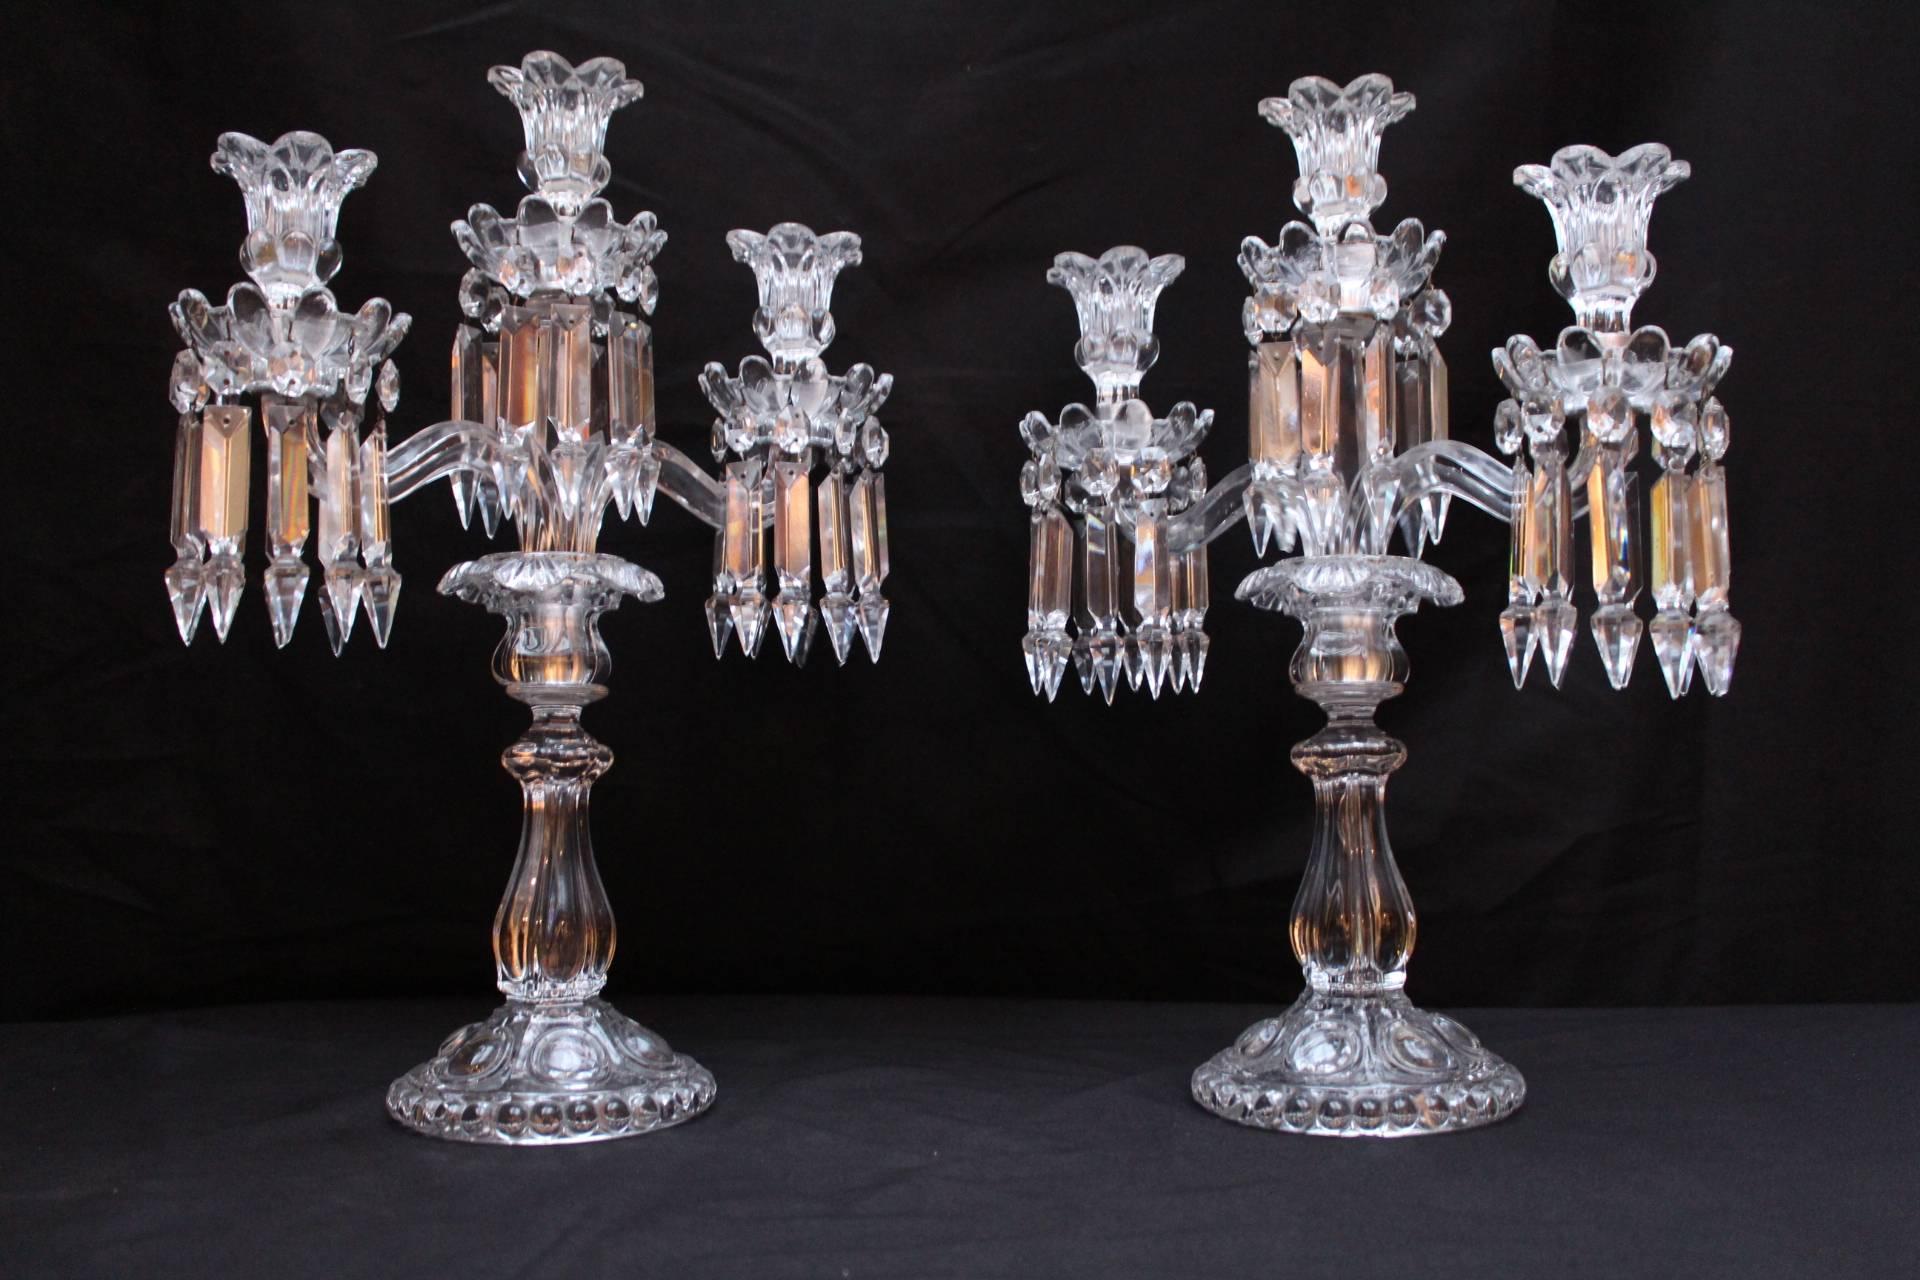 Pair of three lights chandelier or candlestick
Baccarat 
1950
France 

Height 46 cm
Diameter 14 cm
Width 33 cm